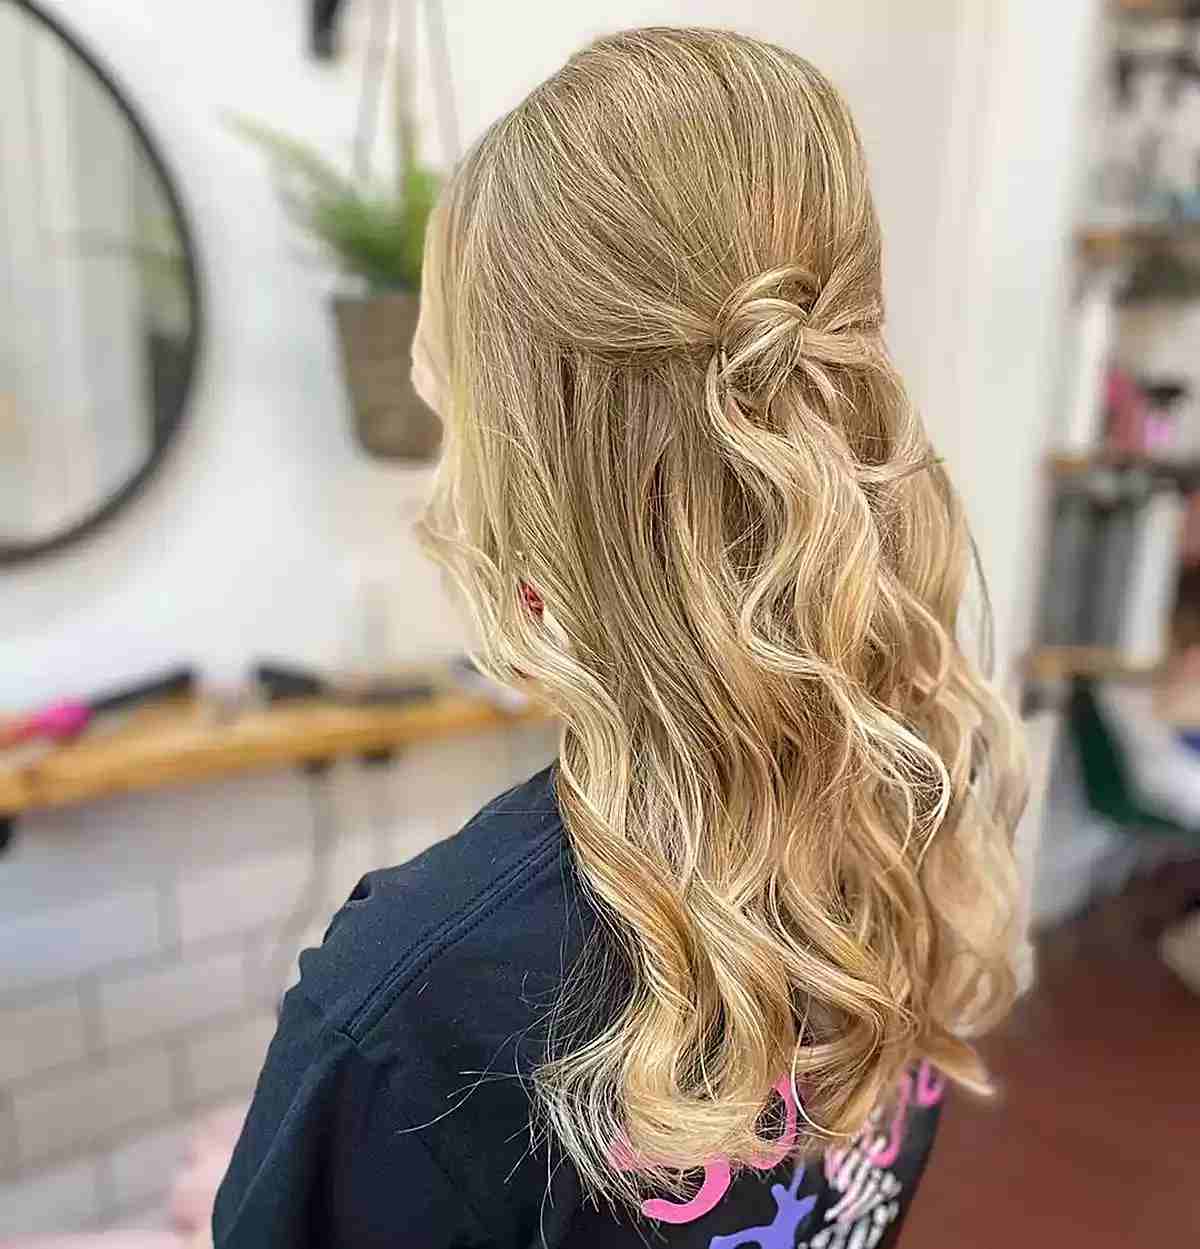 Relaxed Knot on Half-Up Half-Down Hair for Prom